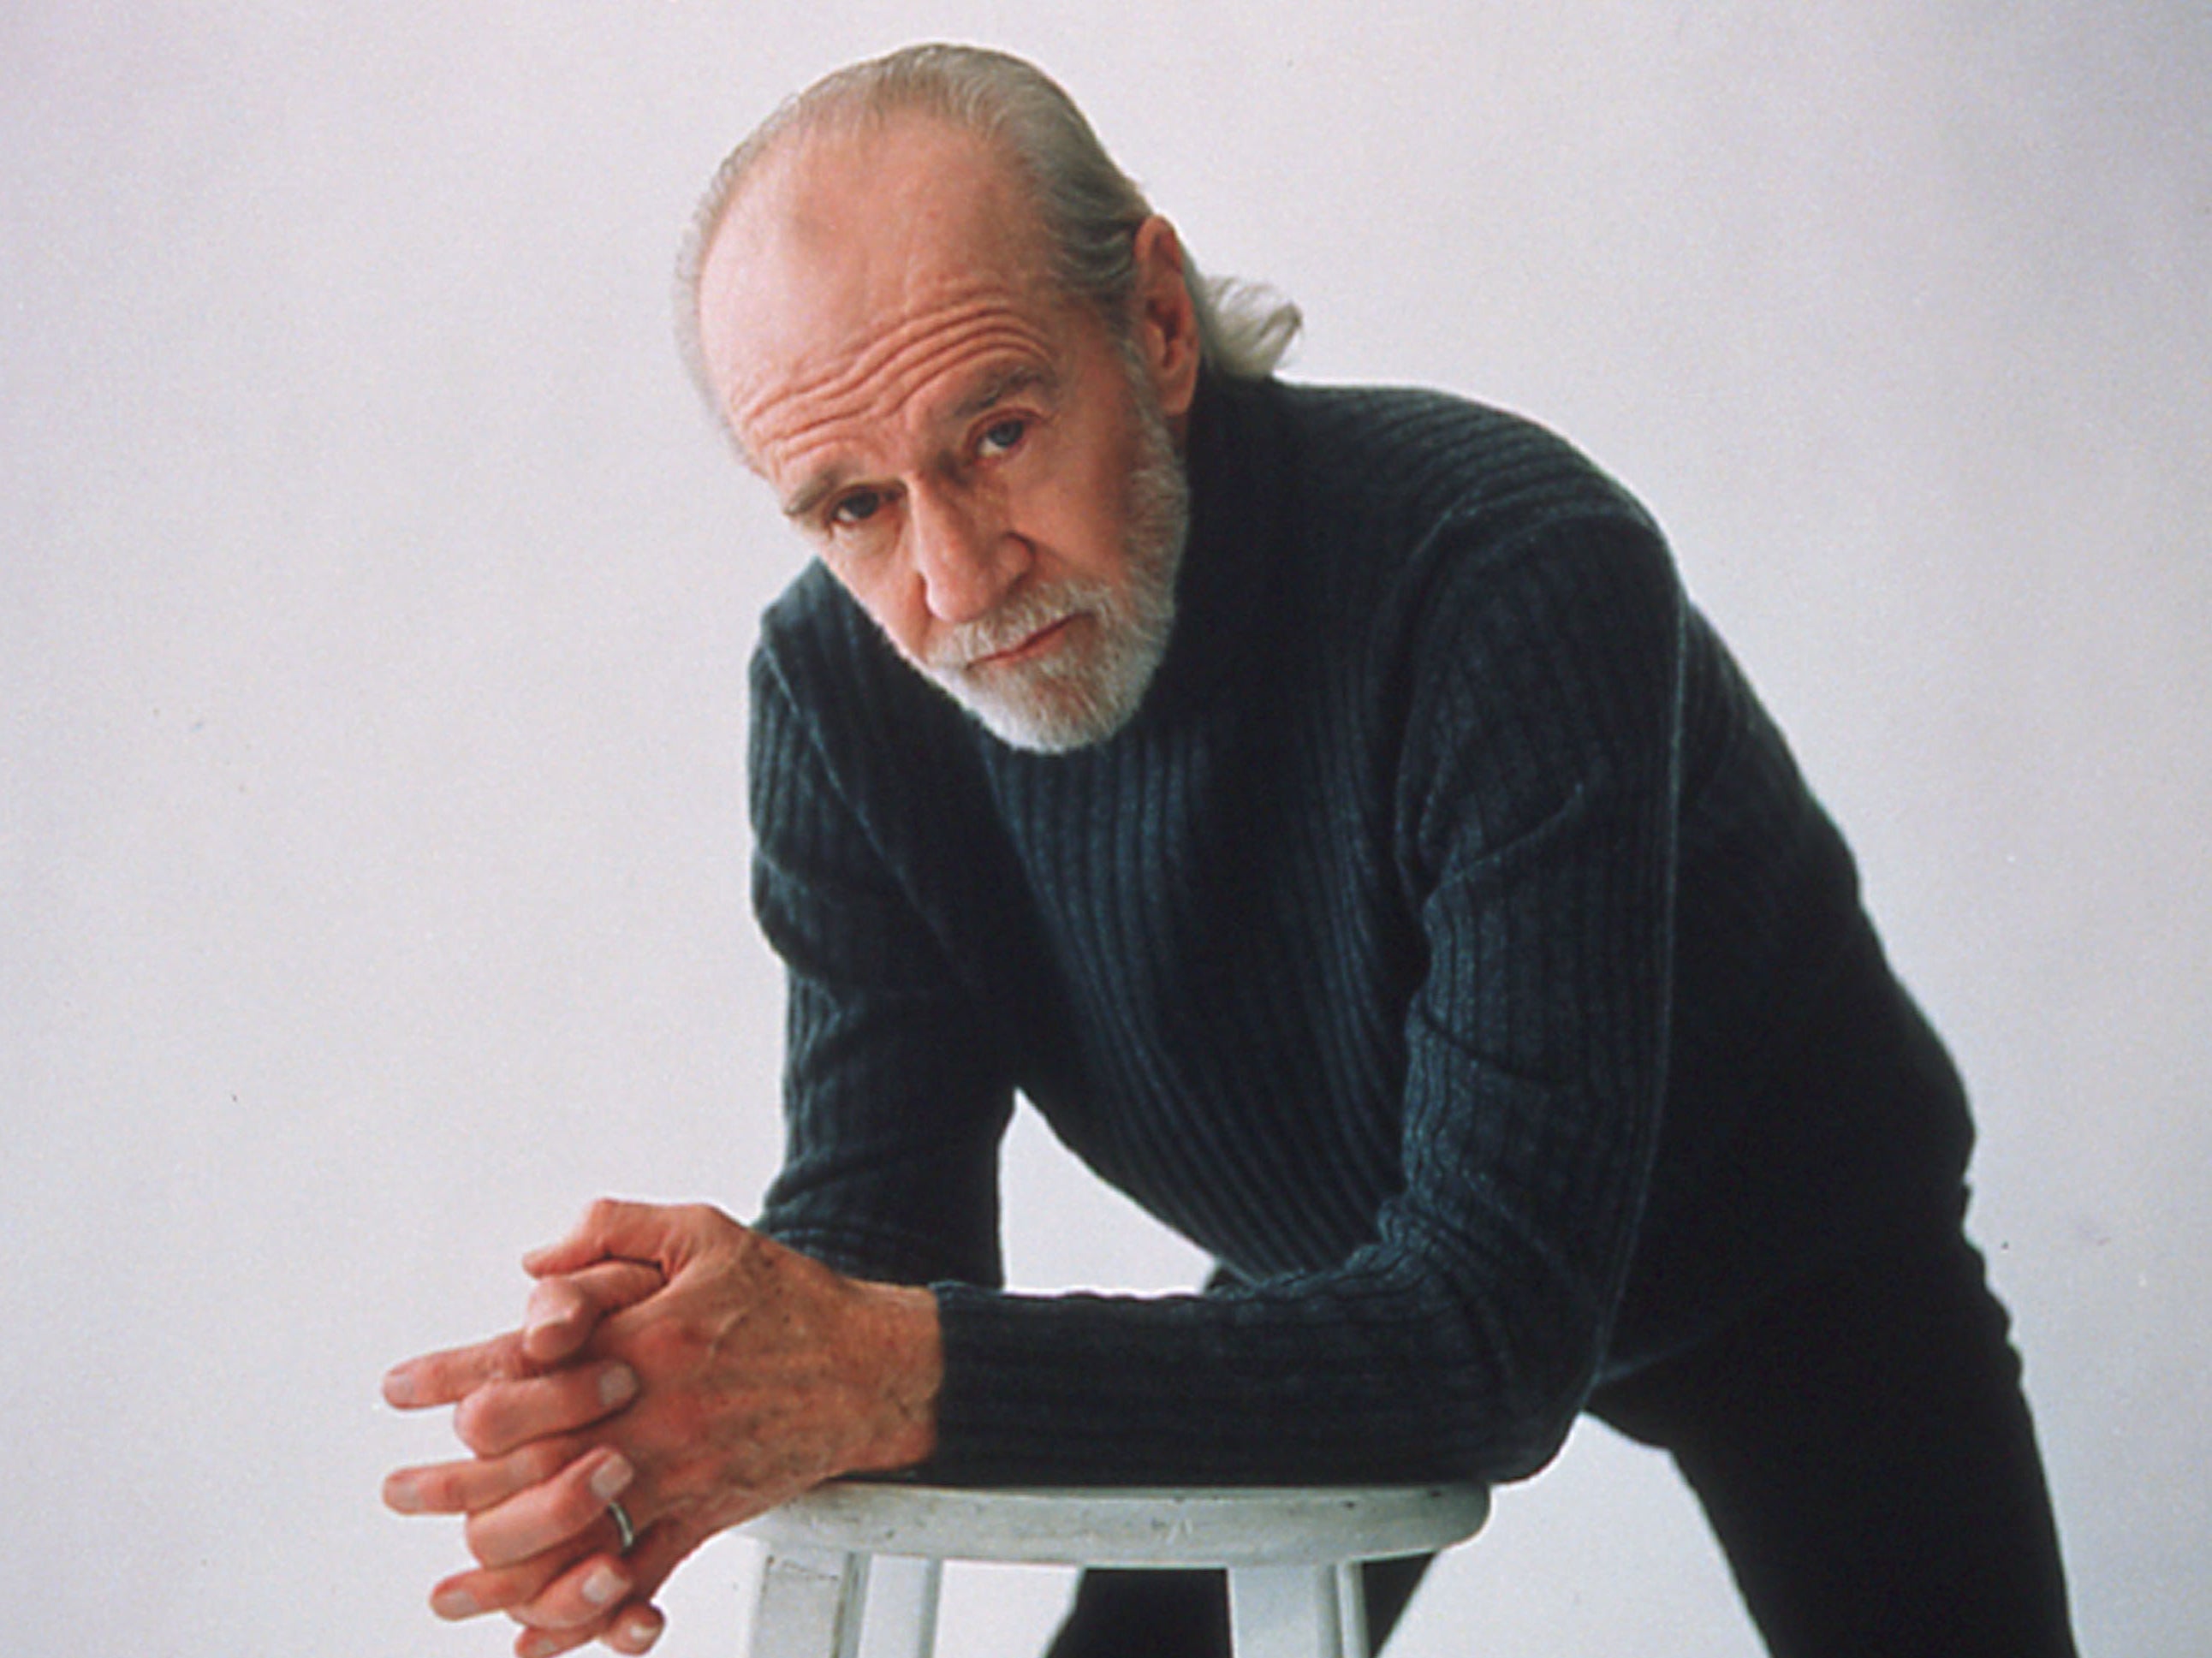 Carlin fronted 14 HBO comedy specials throughout his five-decade career